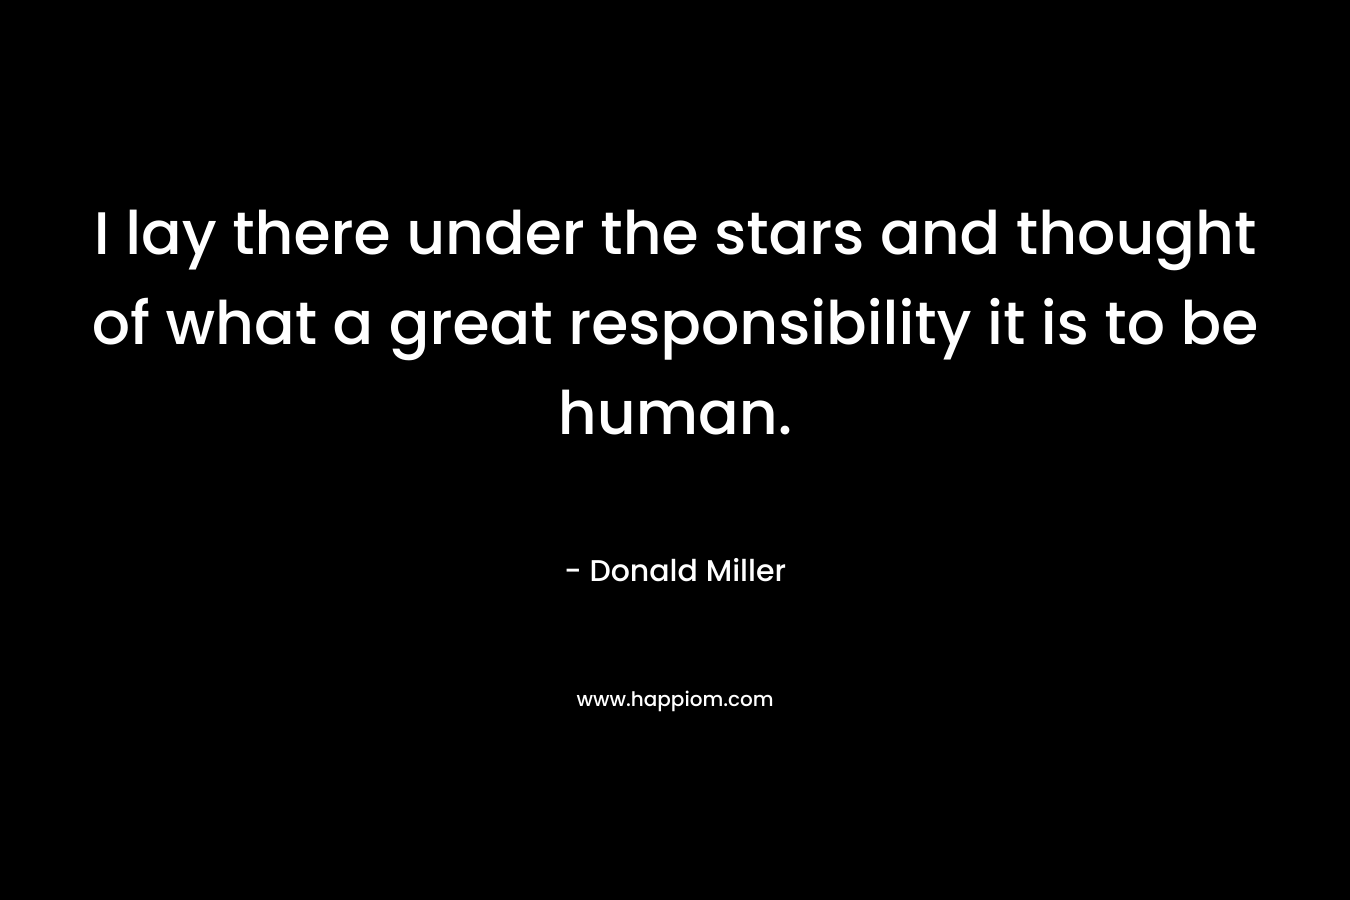 I lay there under the stars and thought of what a great responsibility it is to be human.